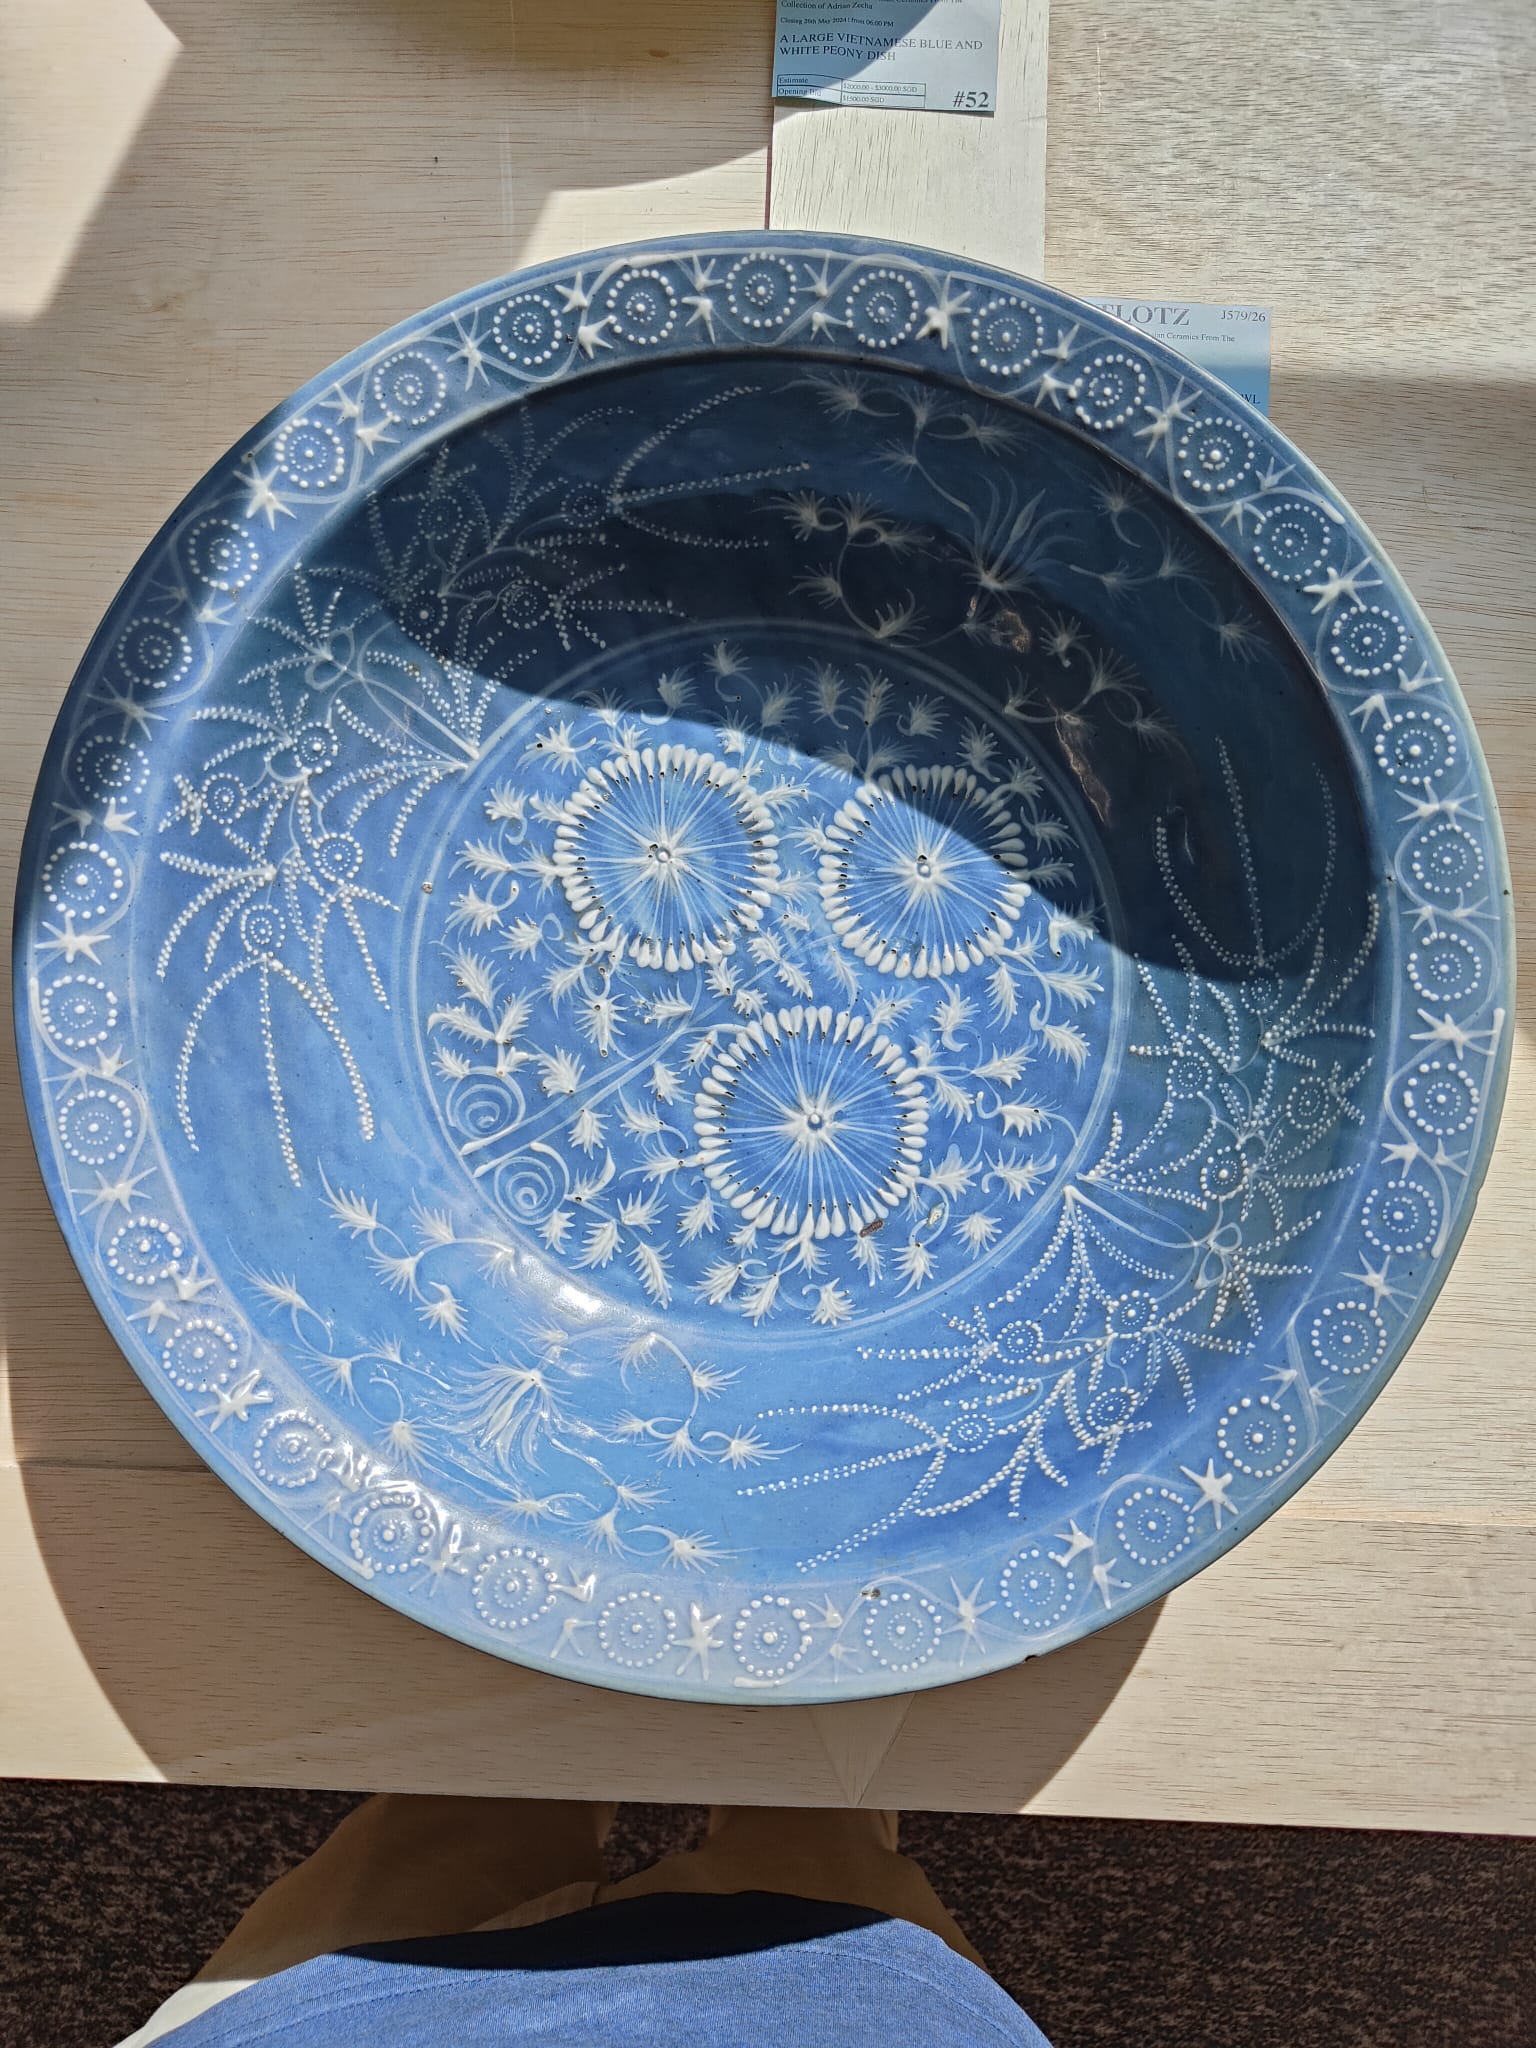 A LARGE SWATOW SLIP-DECORATED BLUE GROUND BOWL - Image 5 of 7